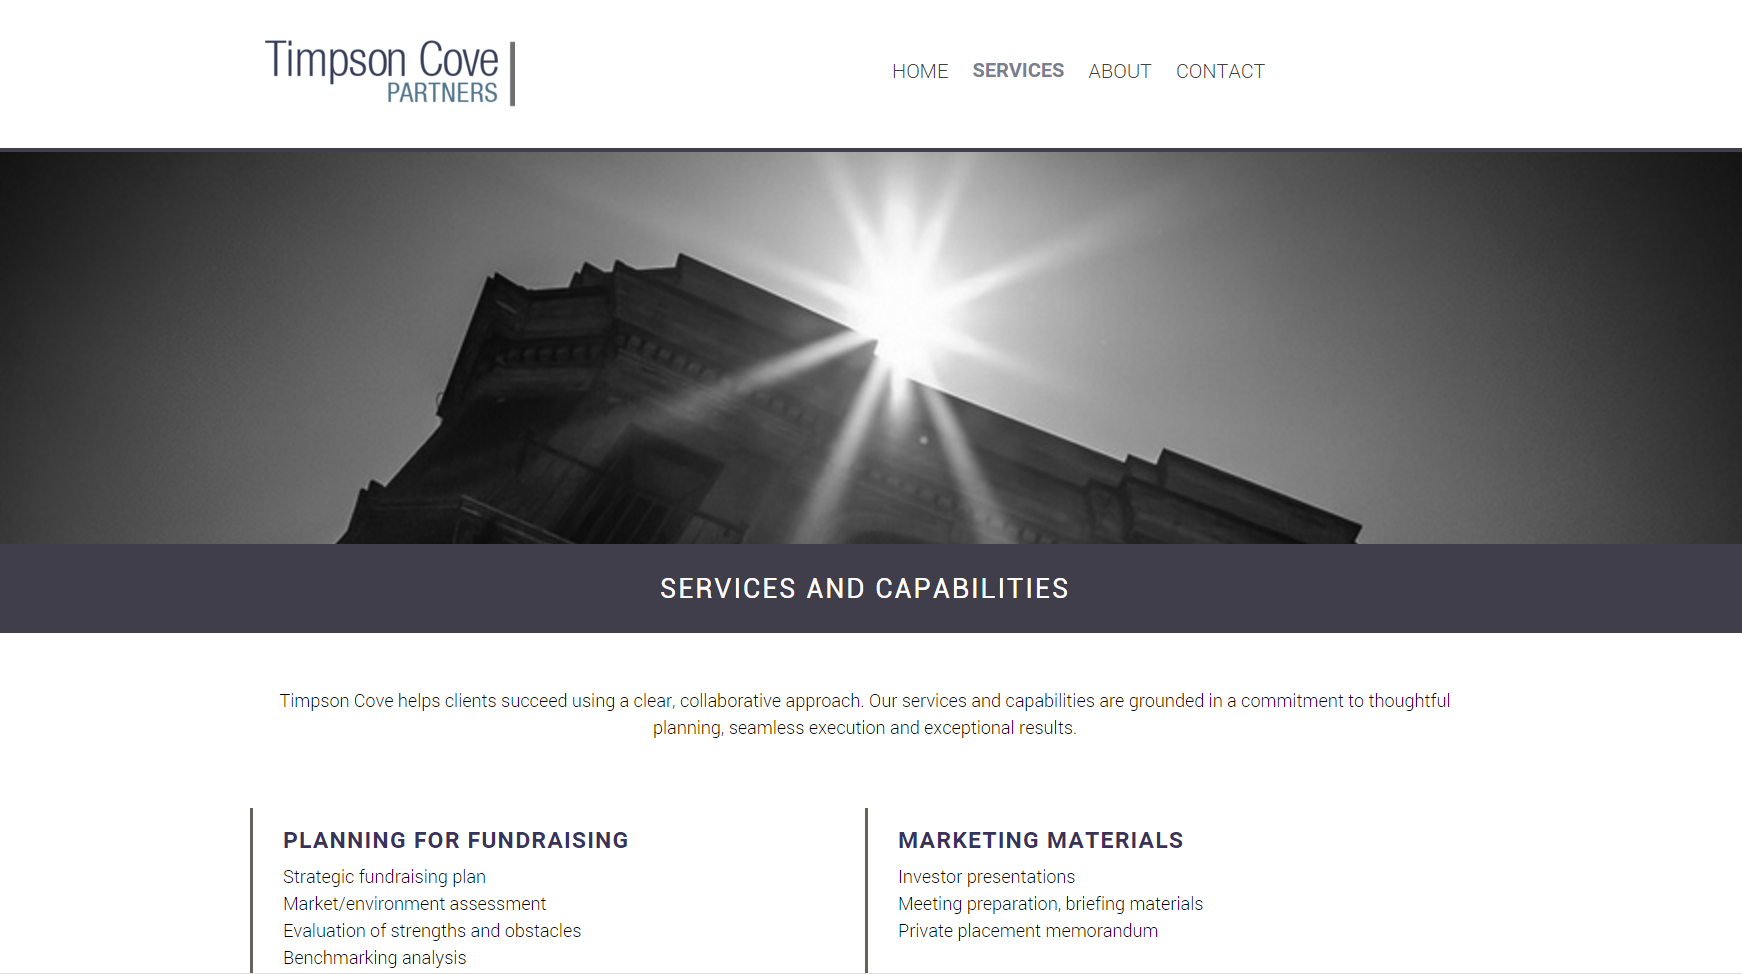 Timpson Cove Partners